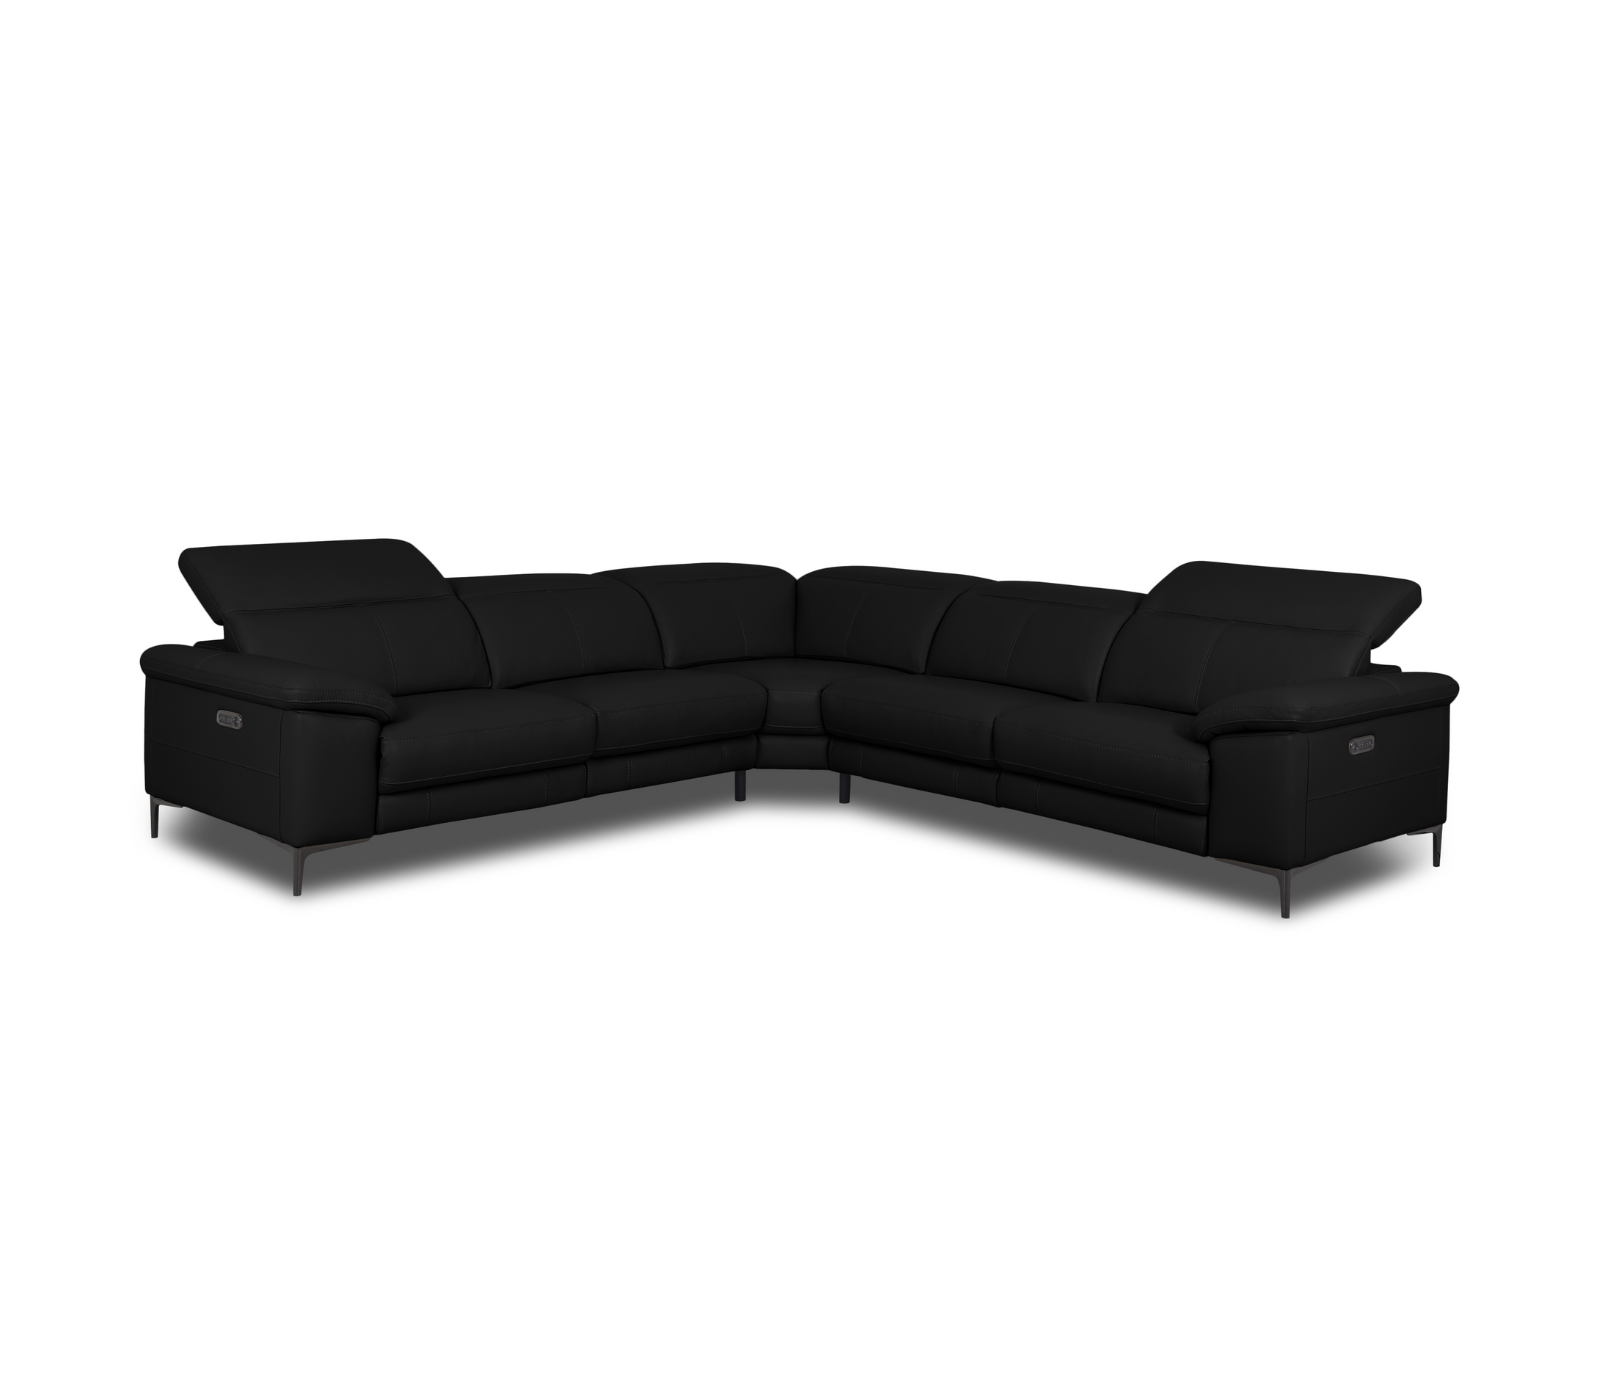 Monaco 5 Power Reclining Sectional - Black Leather